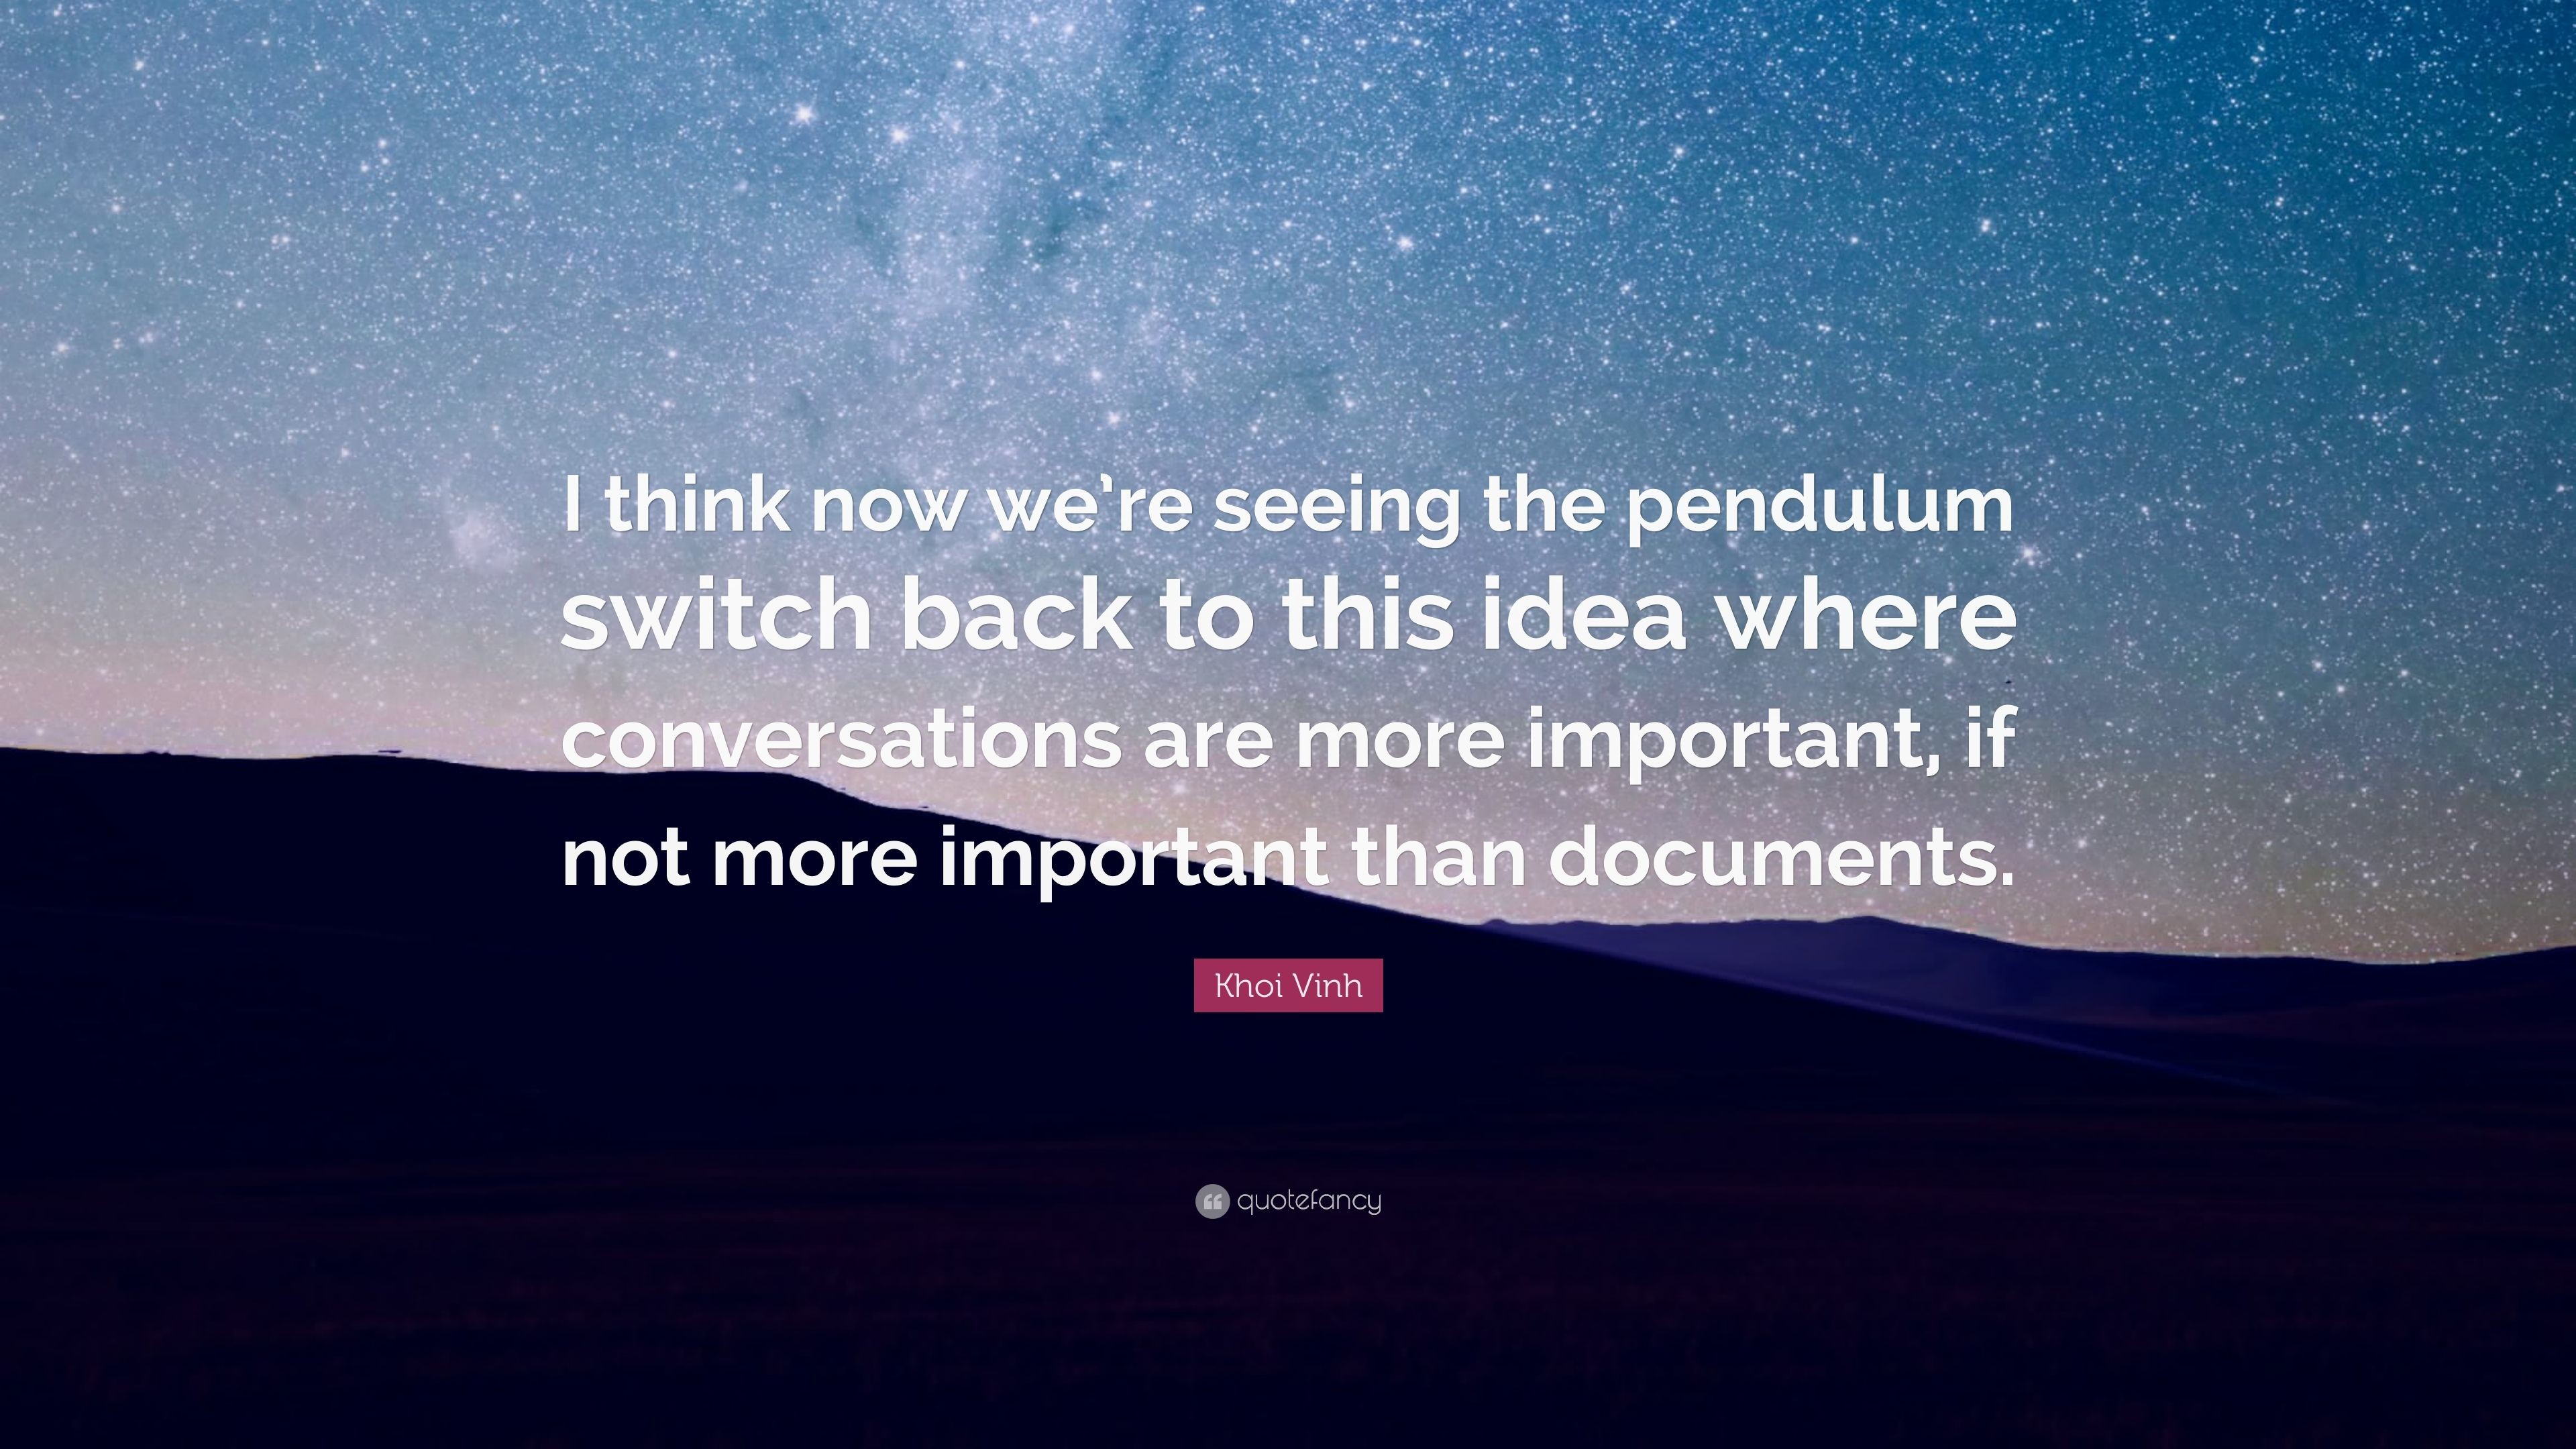 3840x2160 Khoi Vinh Quote: “I think now we're seeing the pendulum switch back